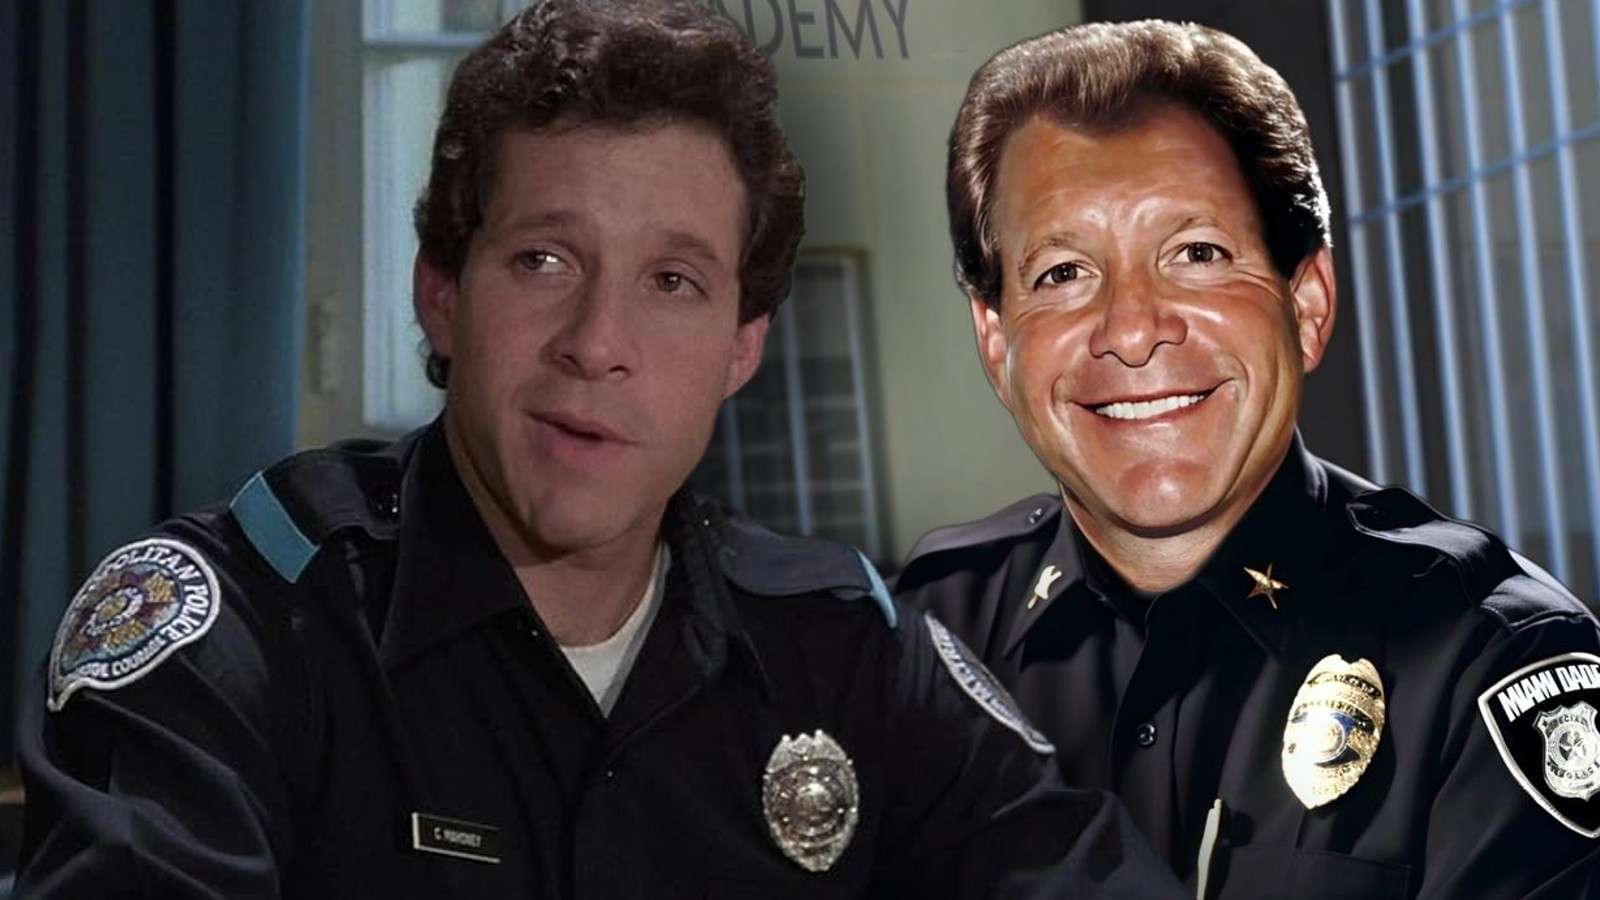 Steve Guttenberg in Police Academy and the fake poster for The New Class